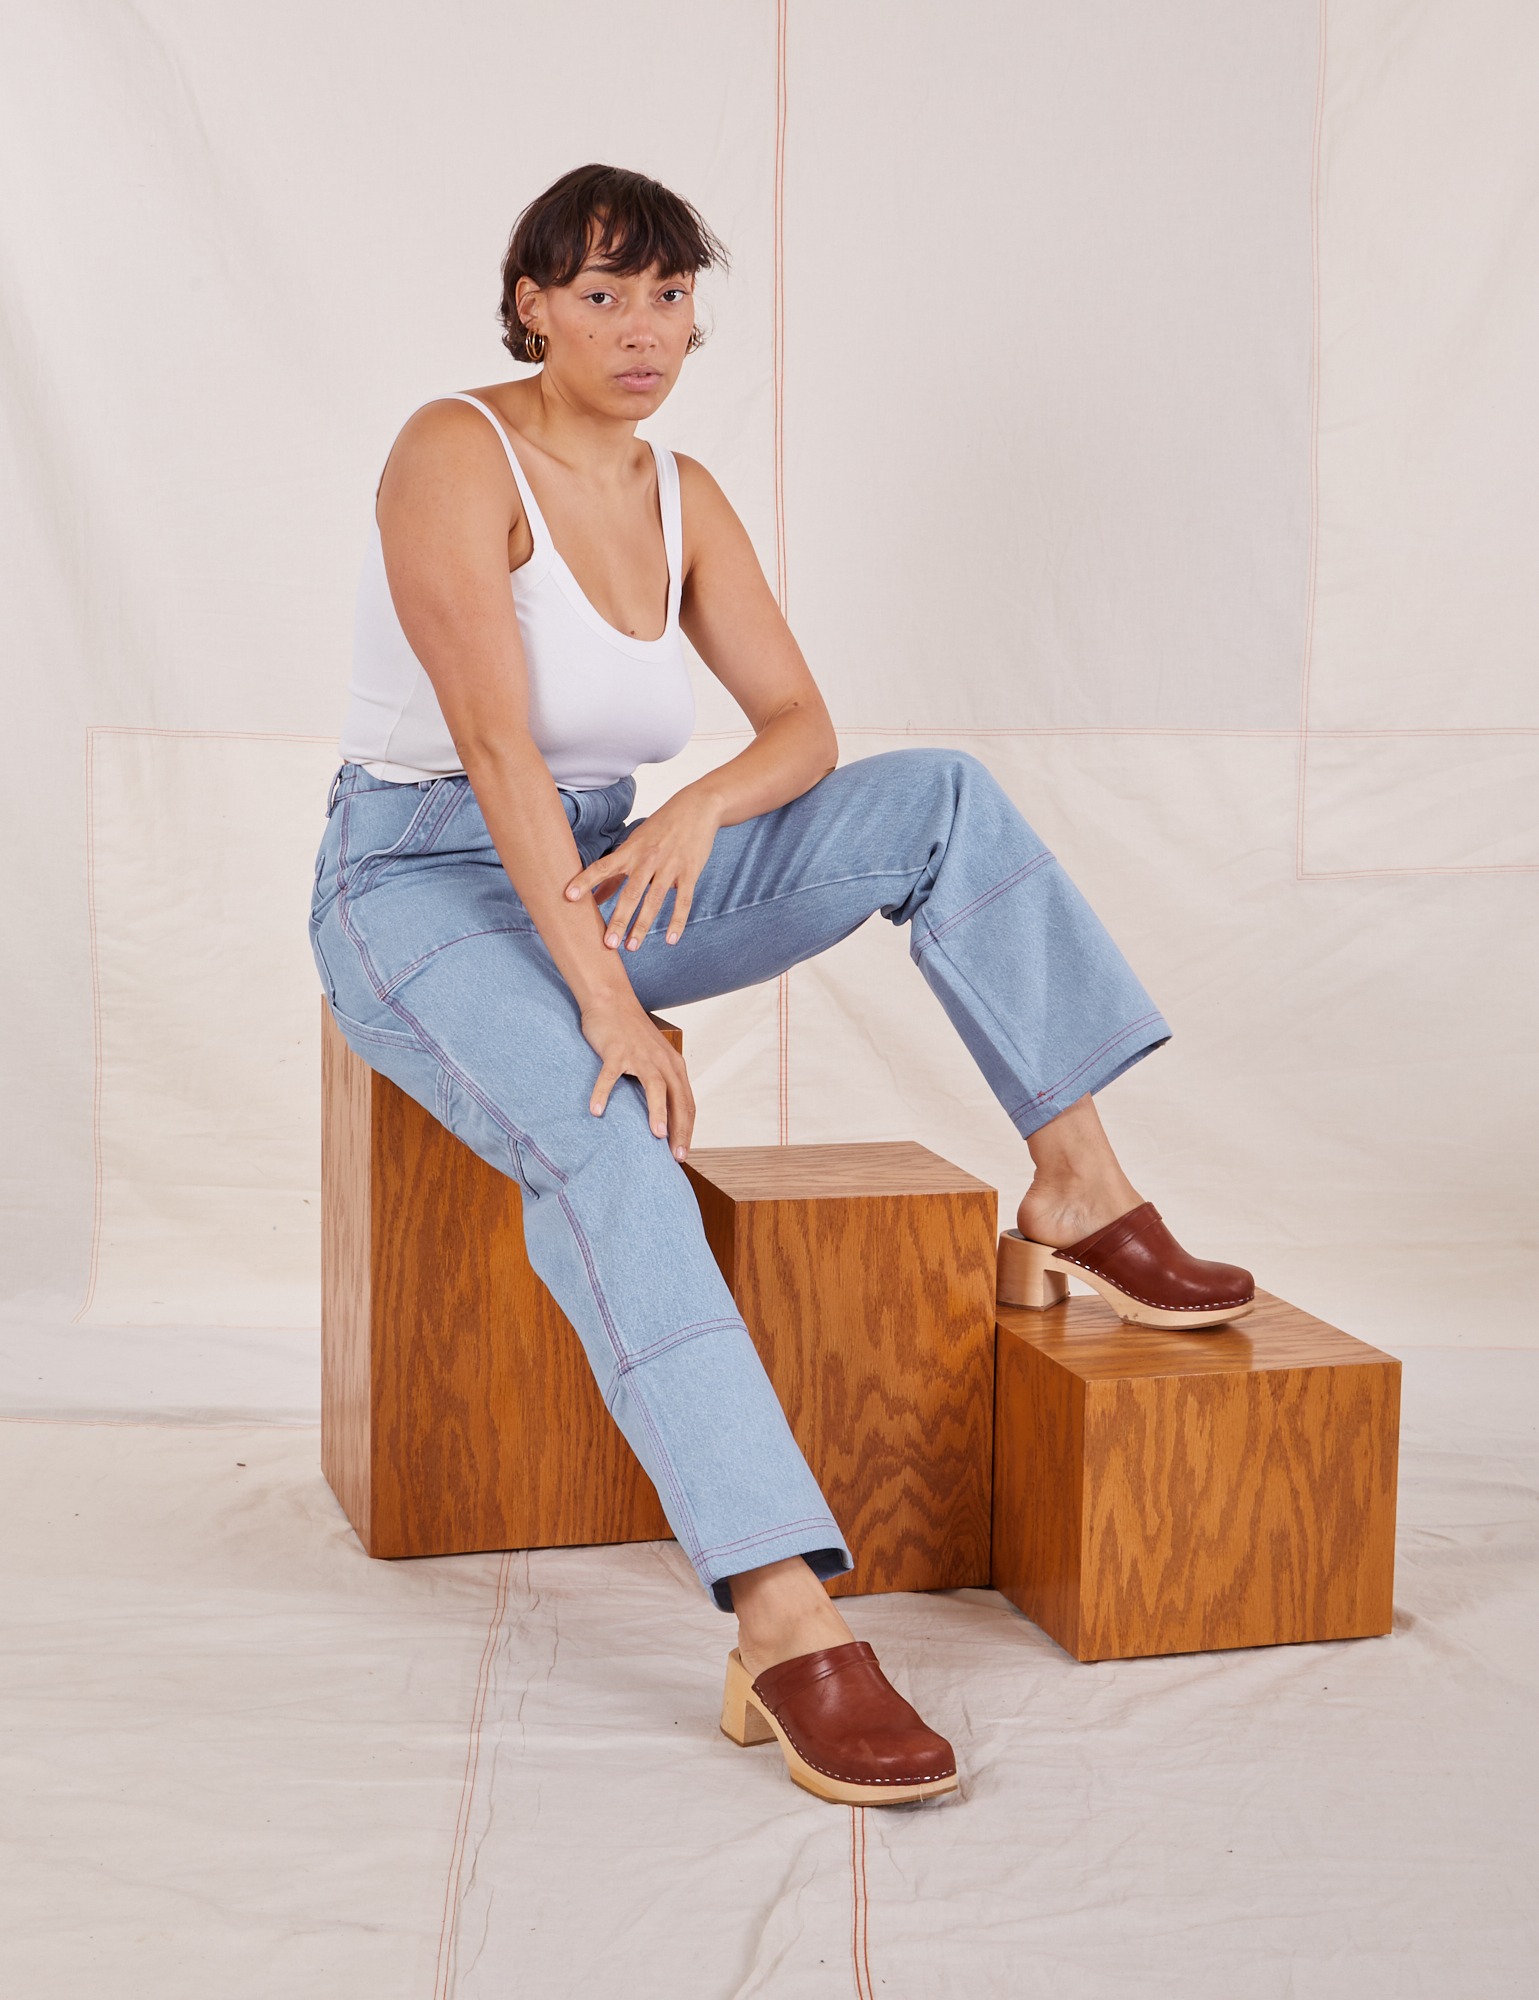 Tiara is wearing Carpenter Jeans in Light Wash and Cropped Cami in vintage tee off-white